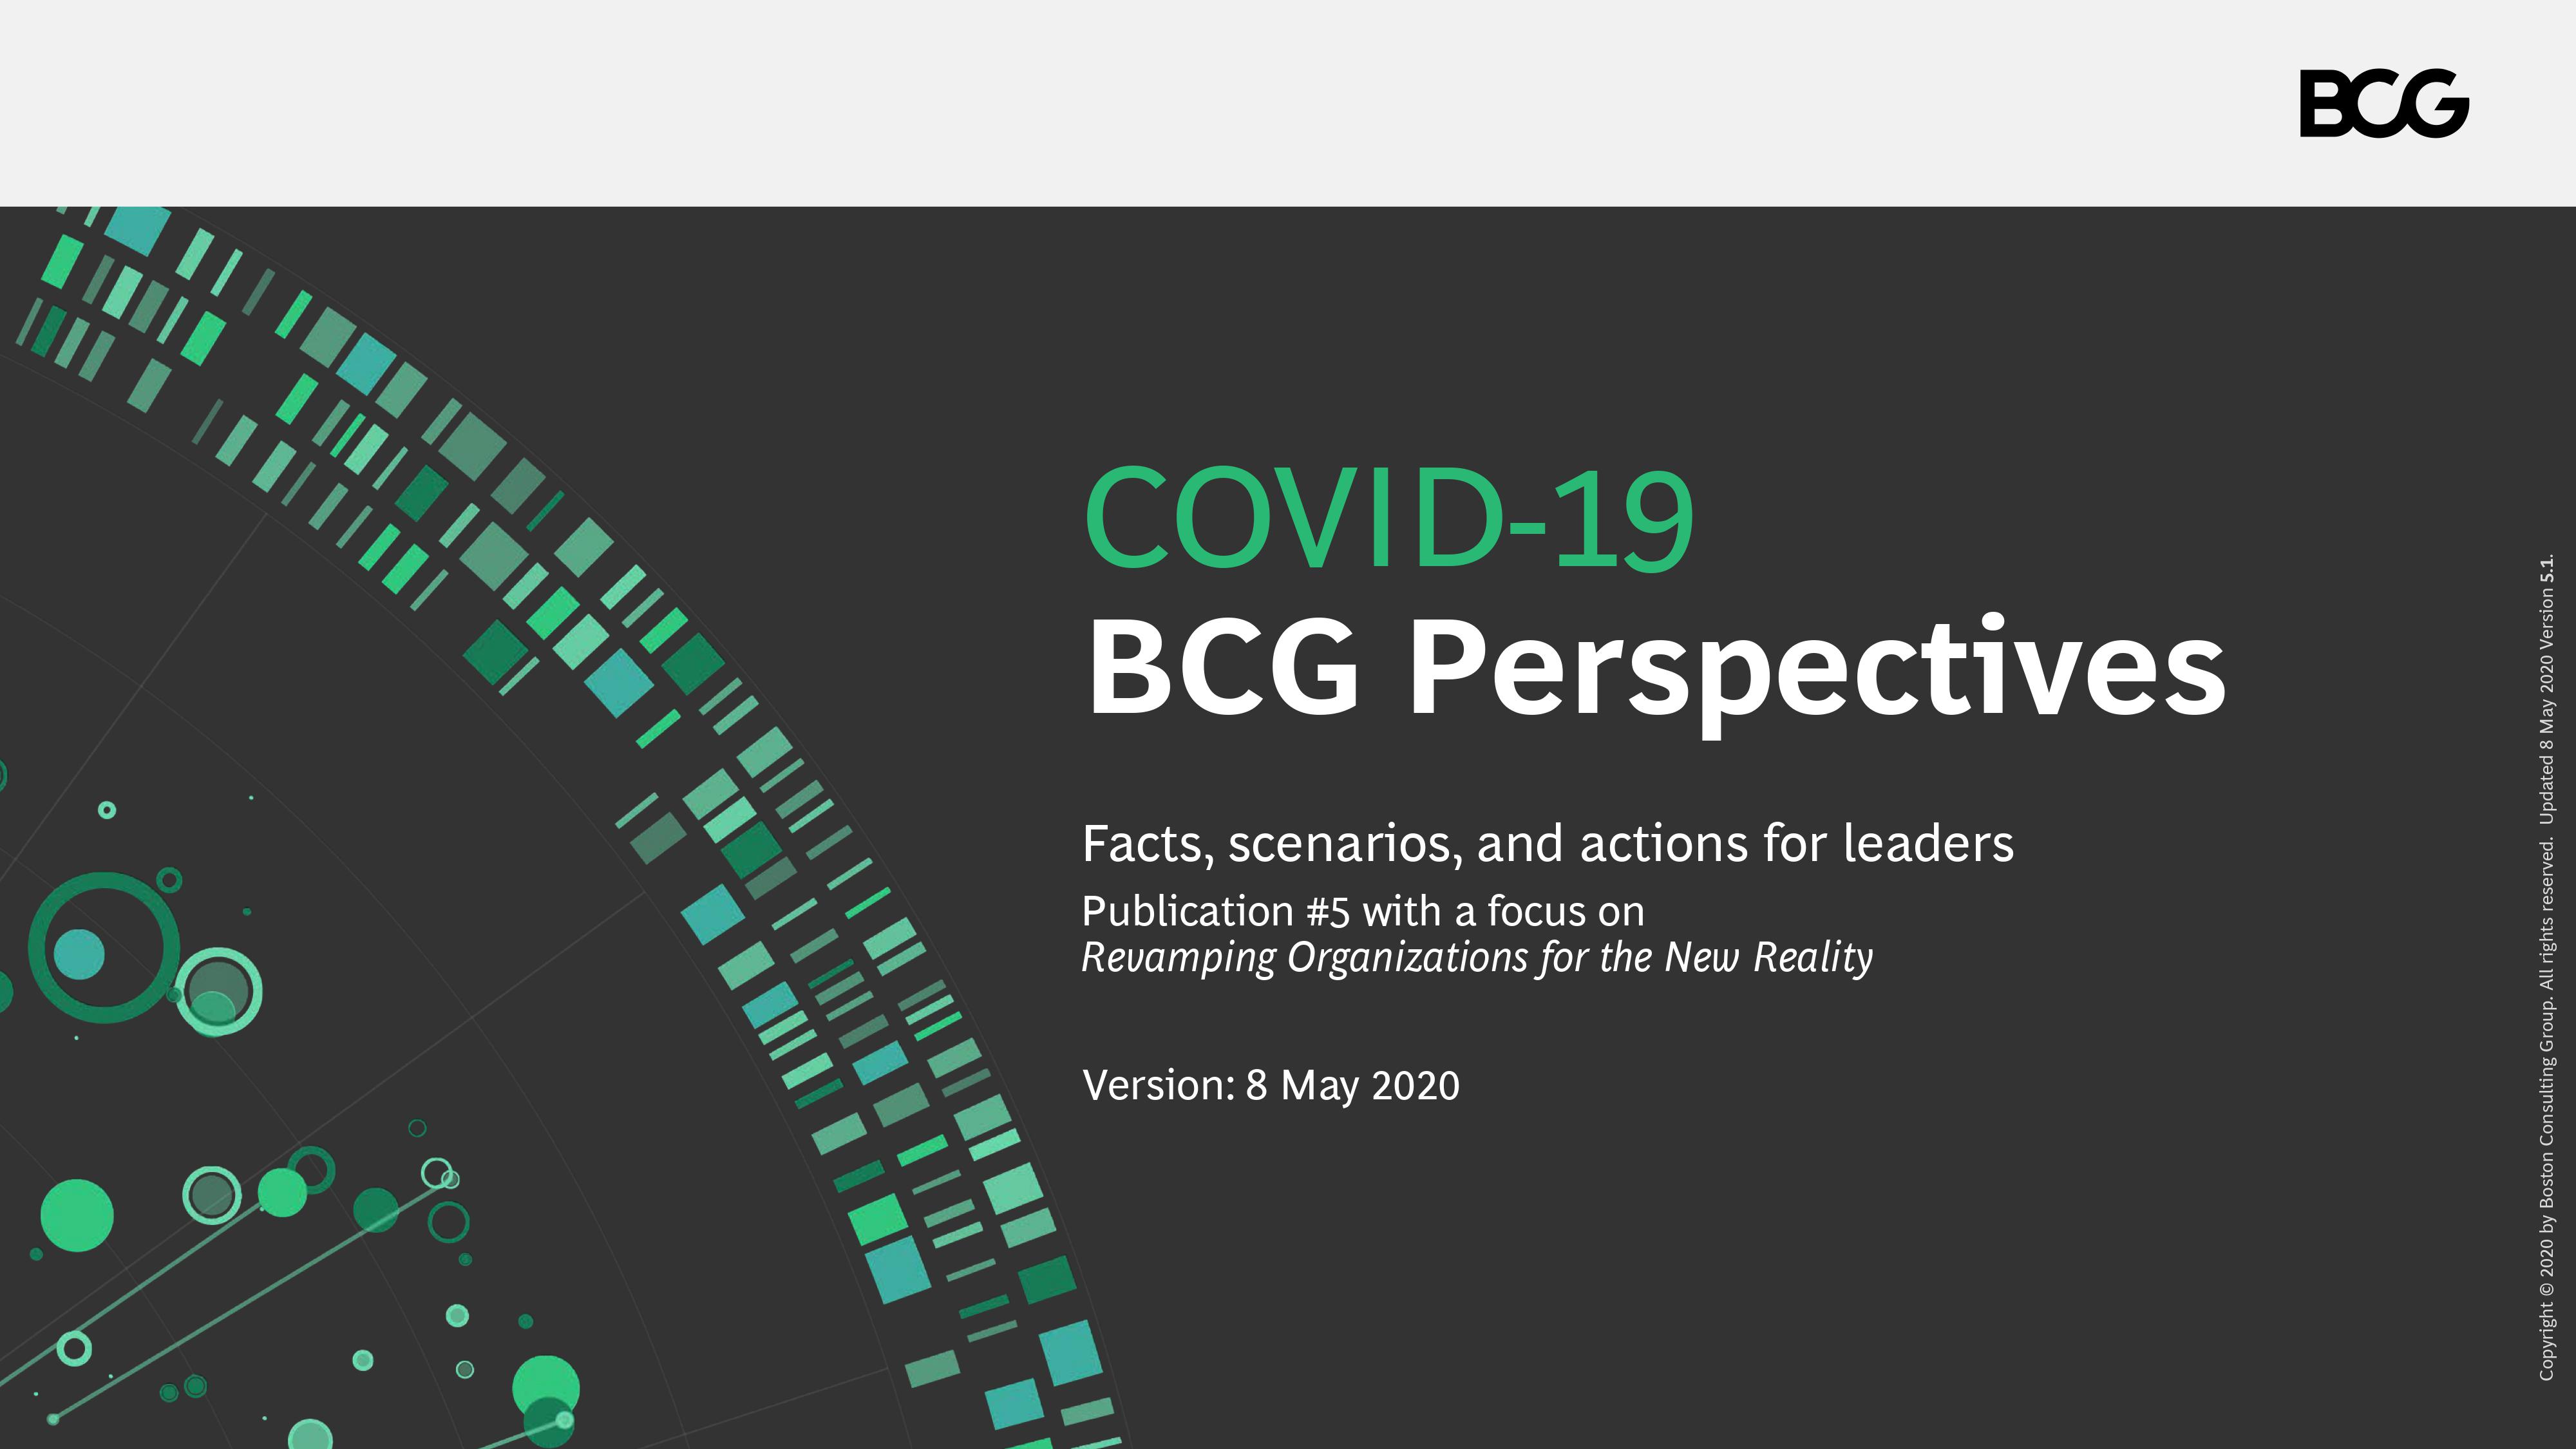 BCG COVID-19 BCG Perspectives